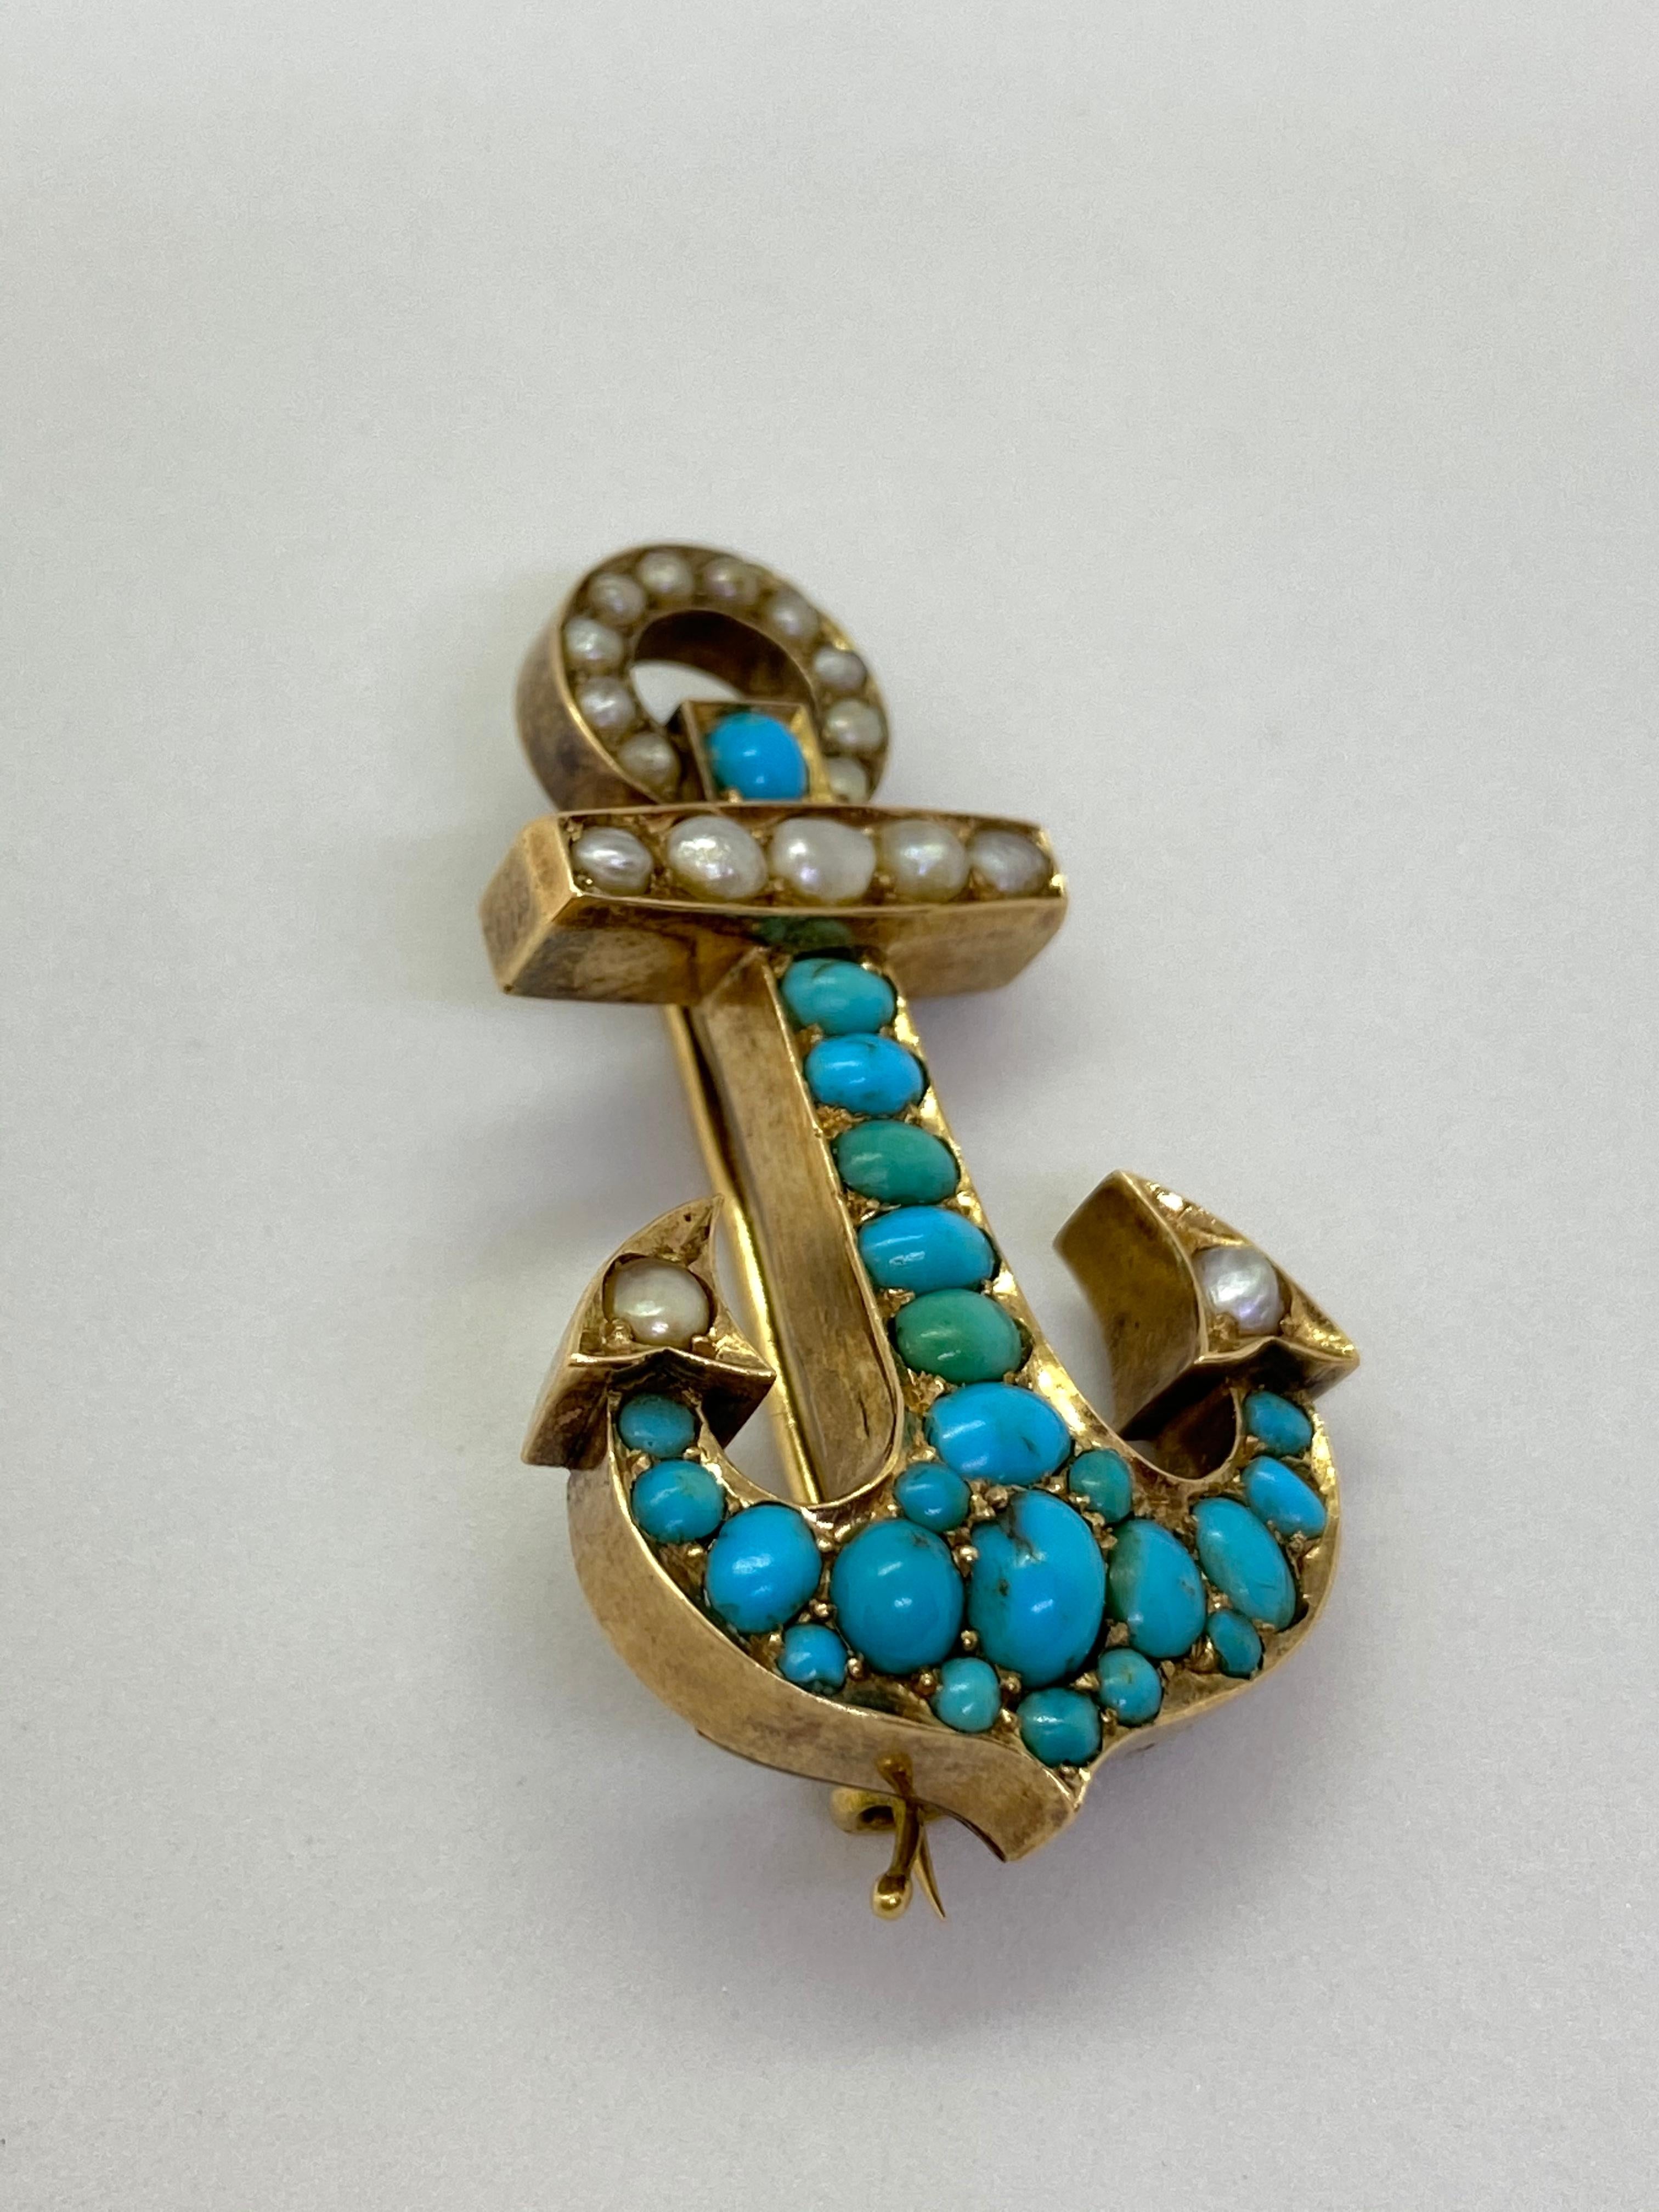 14 Karat Yellow Gold Russia Stones Pearls Anchor Brooch
14k gold, Russia gold stamp 56
Turquoise stones and pearls
Estimated manufactured year 1880